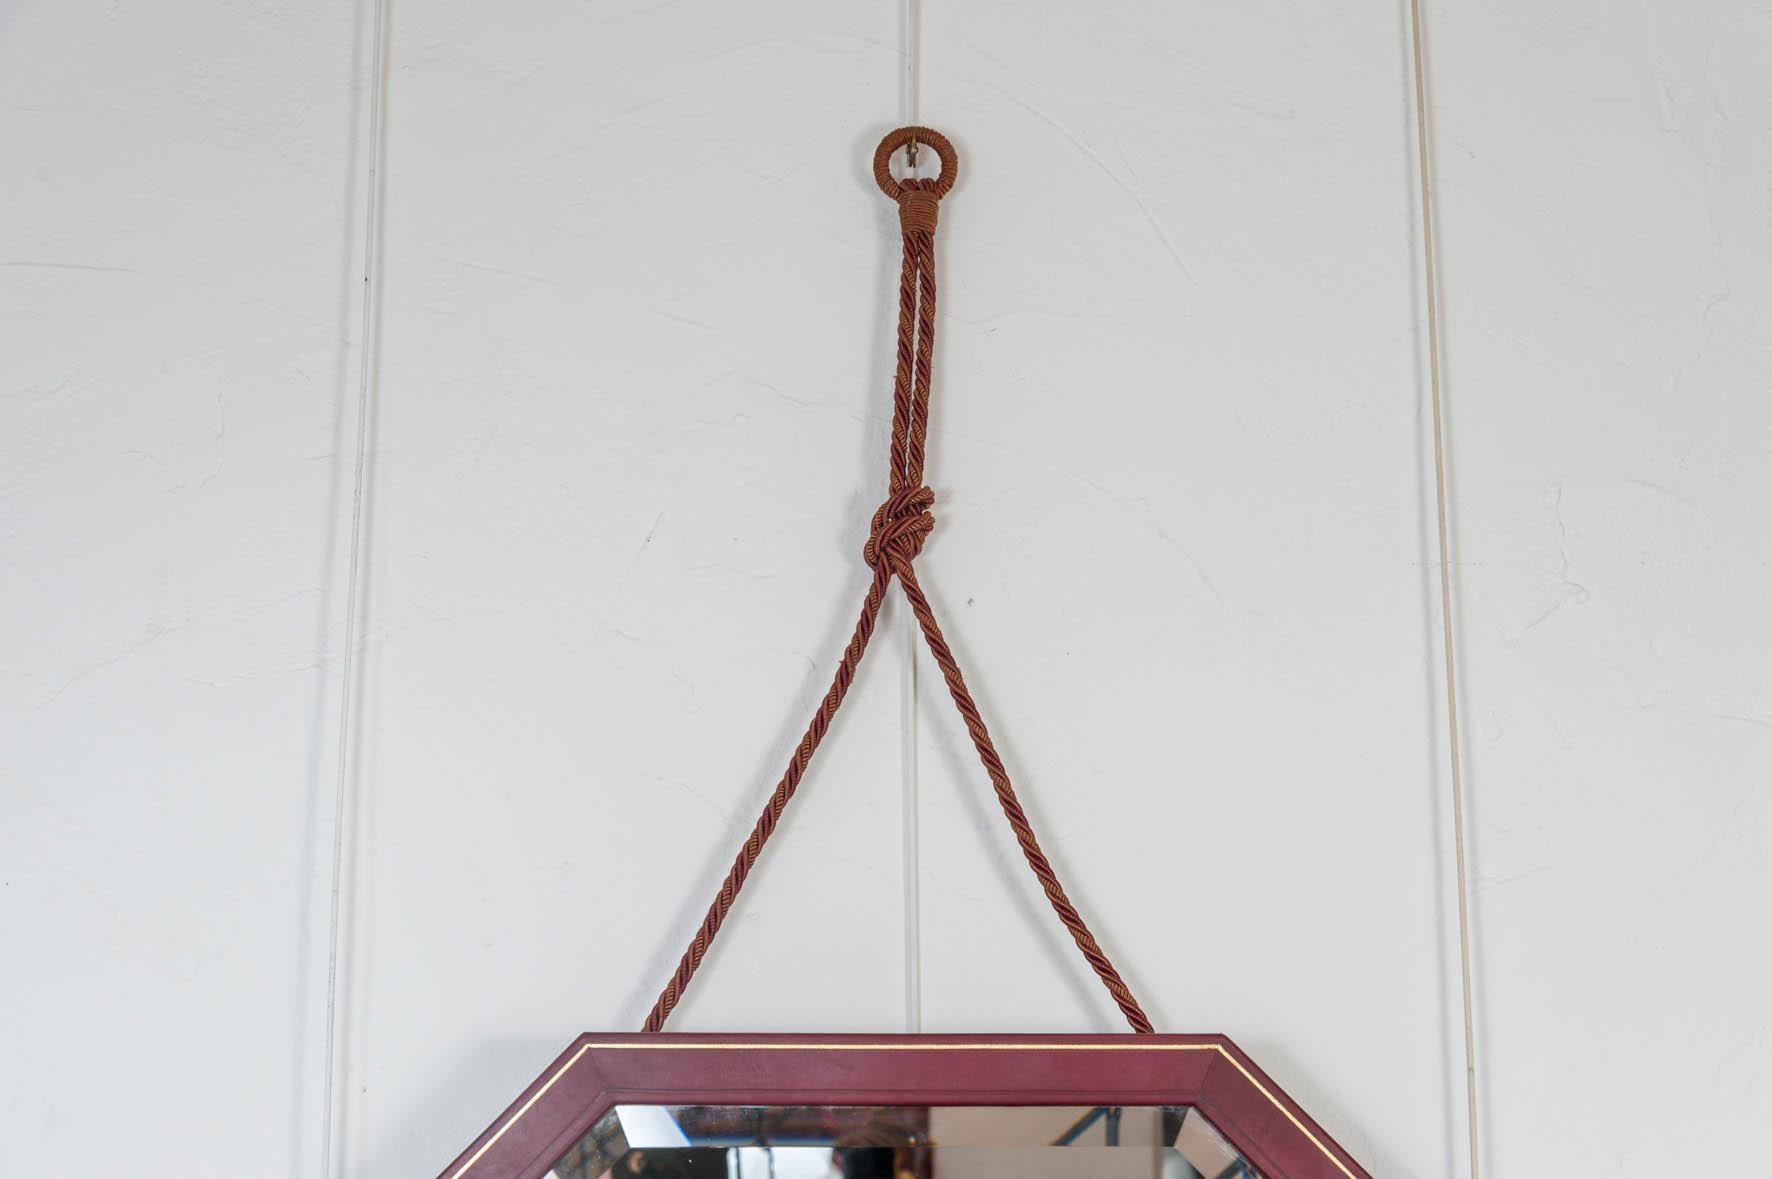 Rare 1930s leather mirror
Dimensions of the mirror without the cord L 106, H 96 cm.